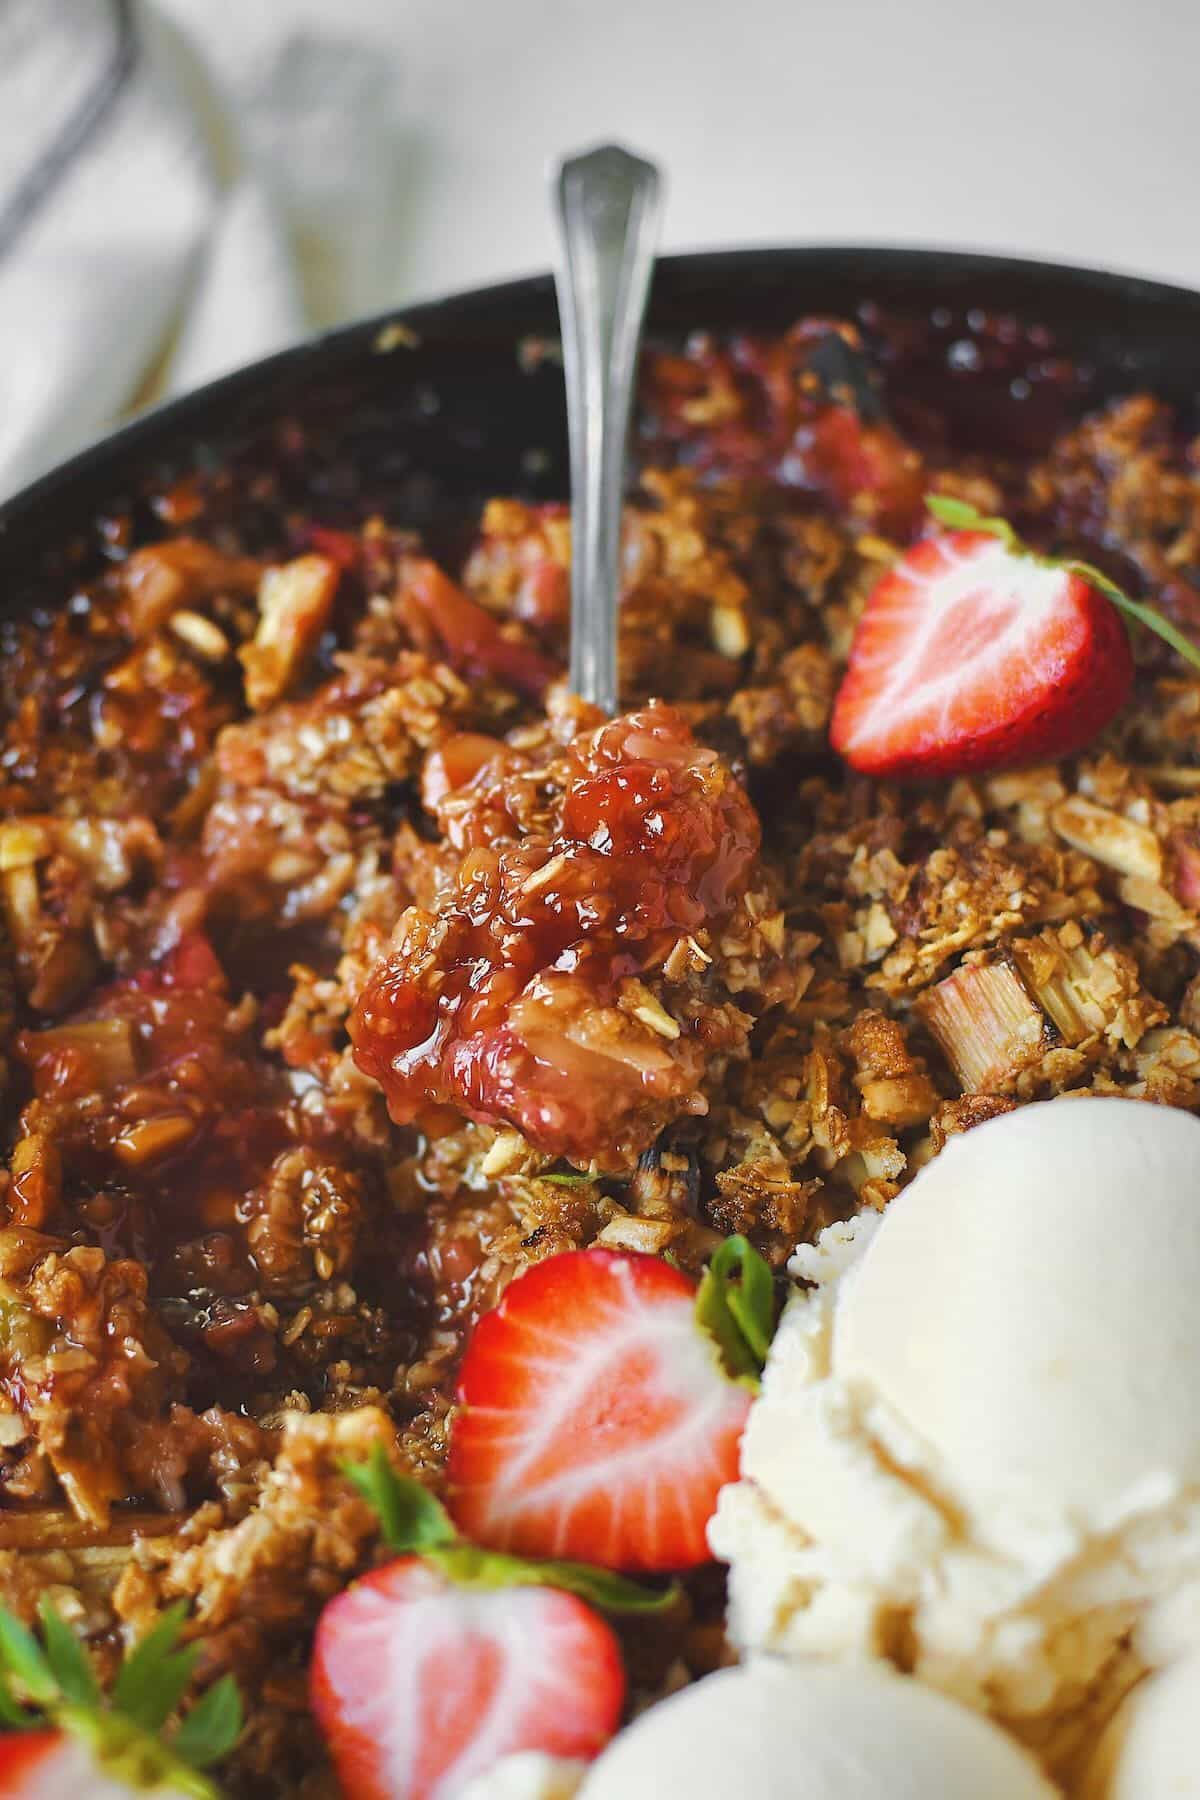 Strawberry Rhubarb Crisp, fresh from the oven and topped with fresh ice cream and sliced strawberries. Getting a first bite!